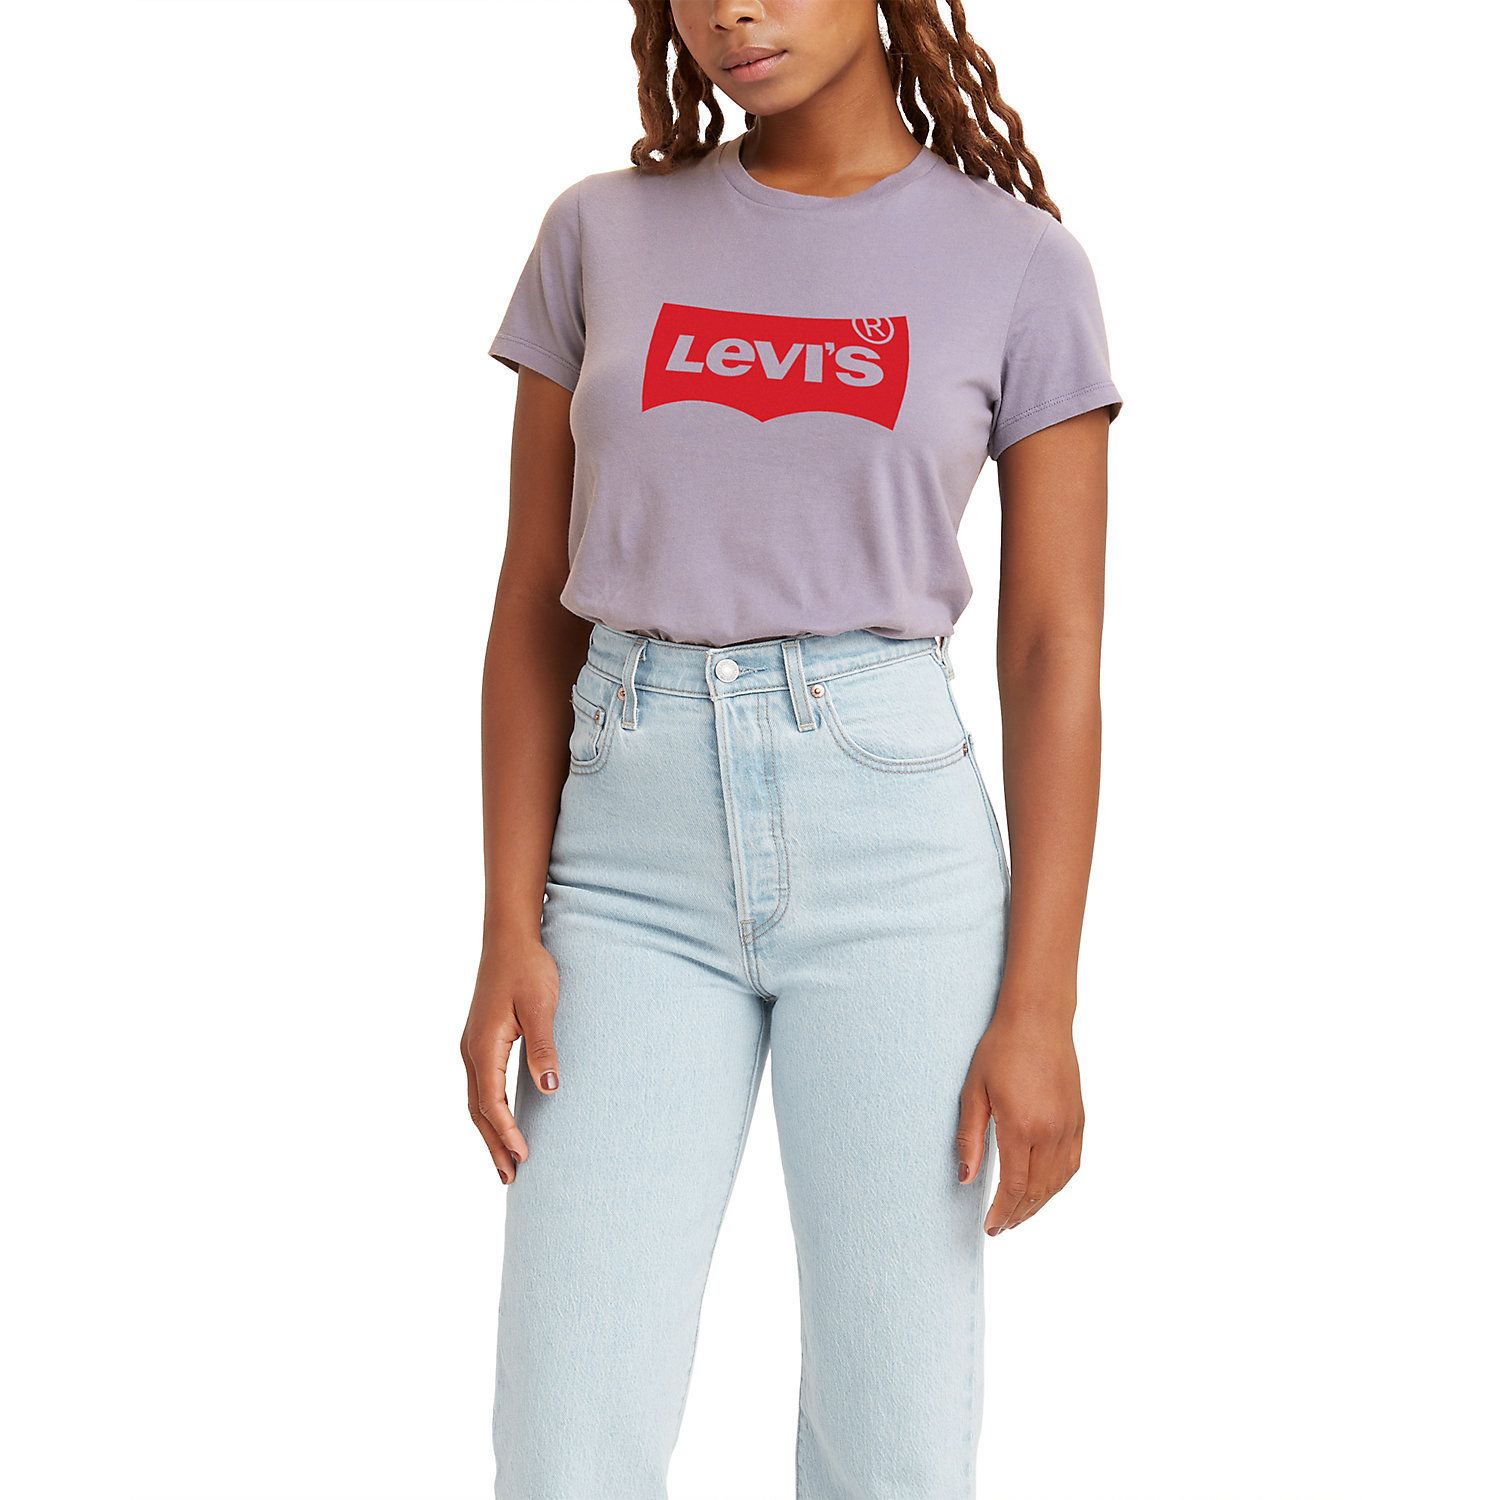 Image for Levi's Women's Logo Perfect Tee at Kohl's.